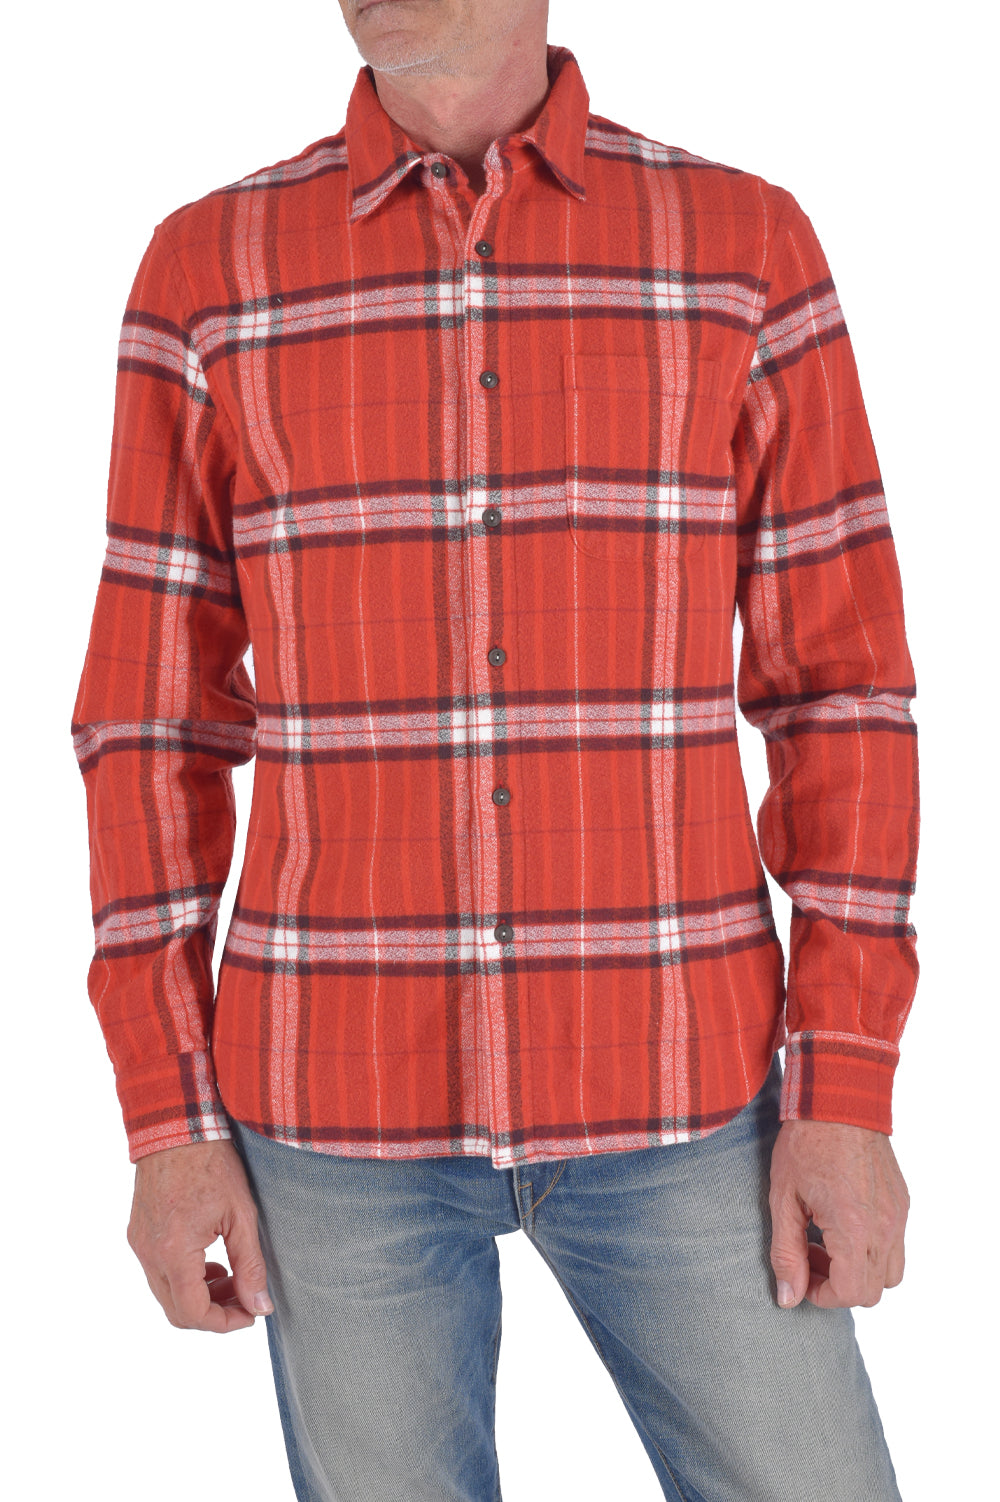 KATO "The Ripper" Organic Cotton Vintage Plaid Brushed - Red - City Workshop Men's Supply Co.